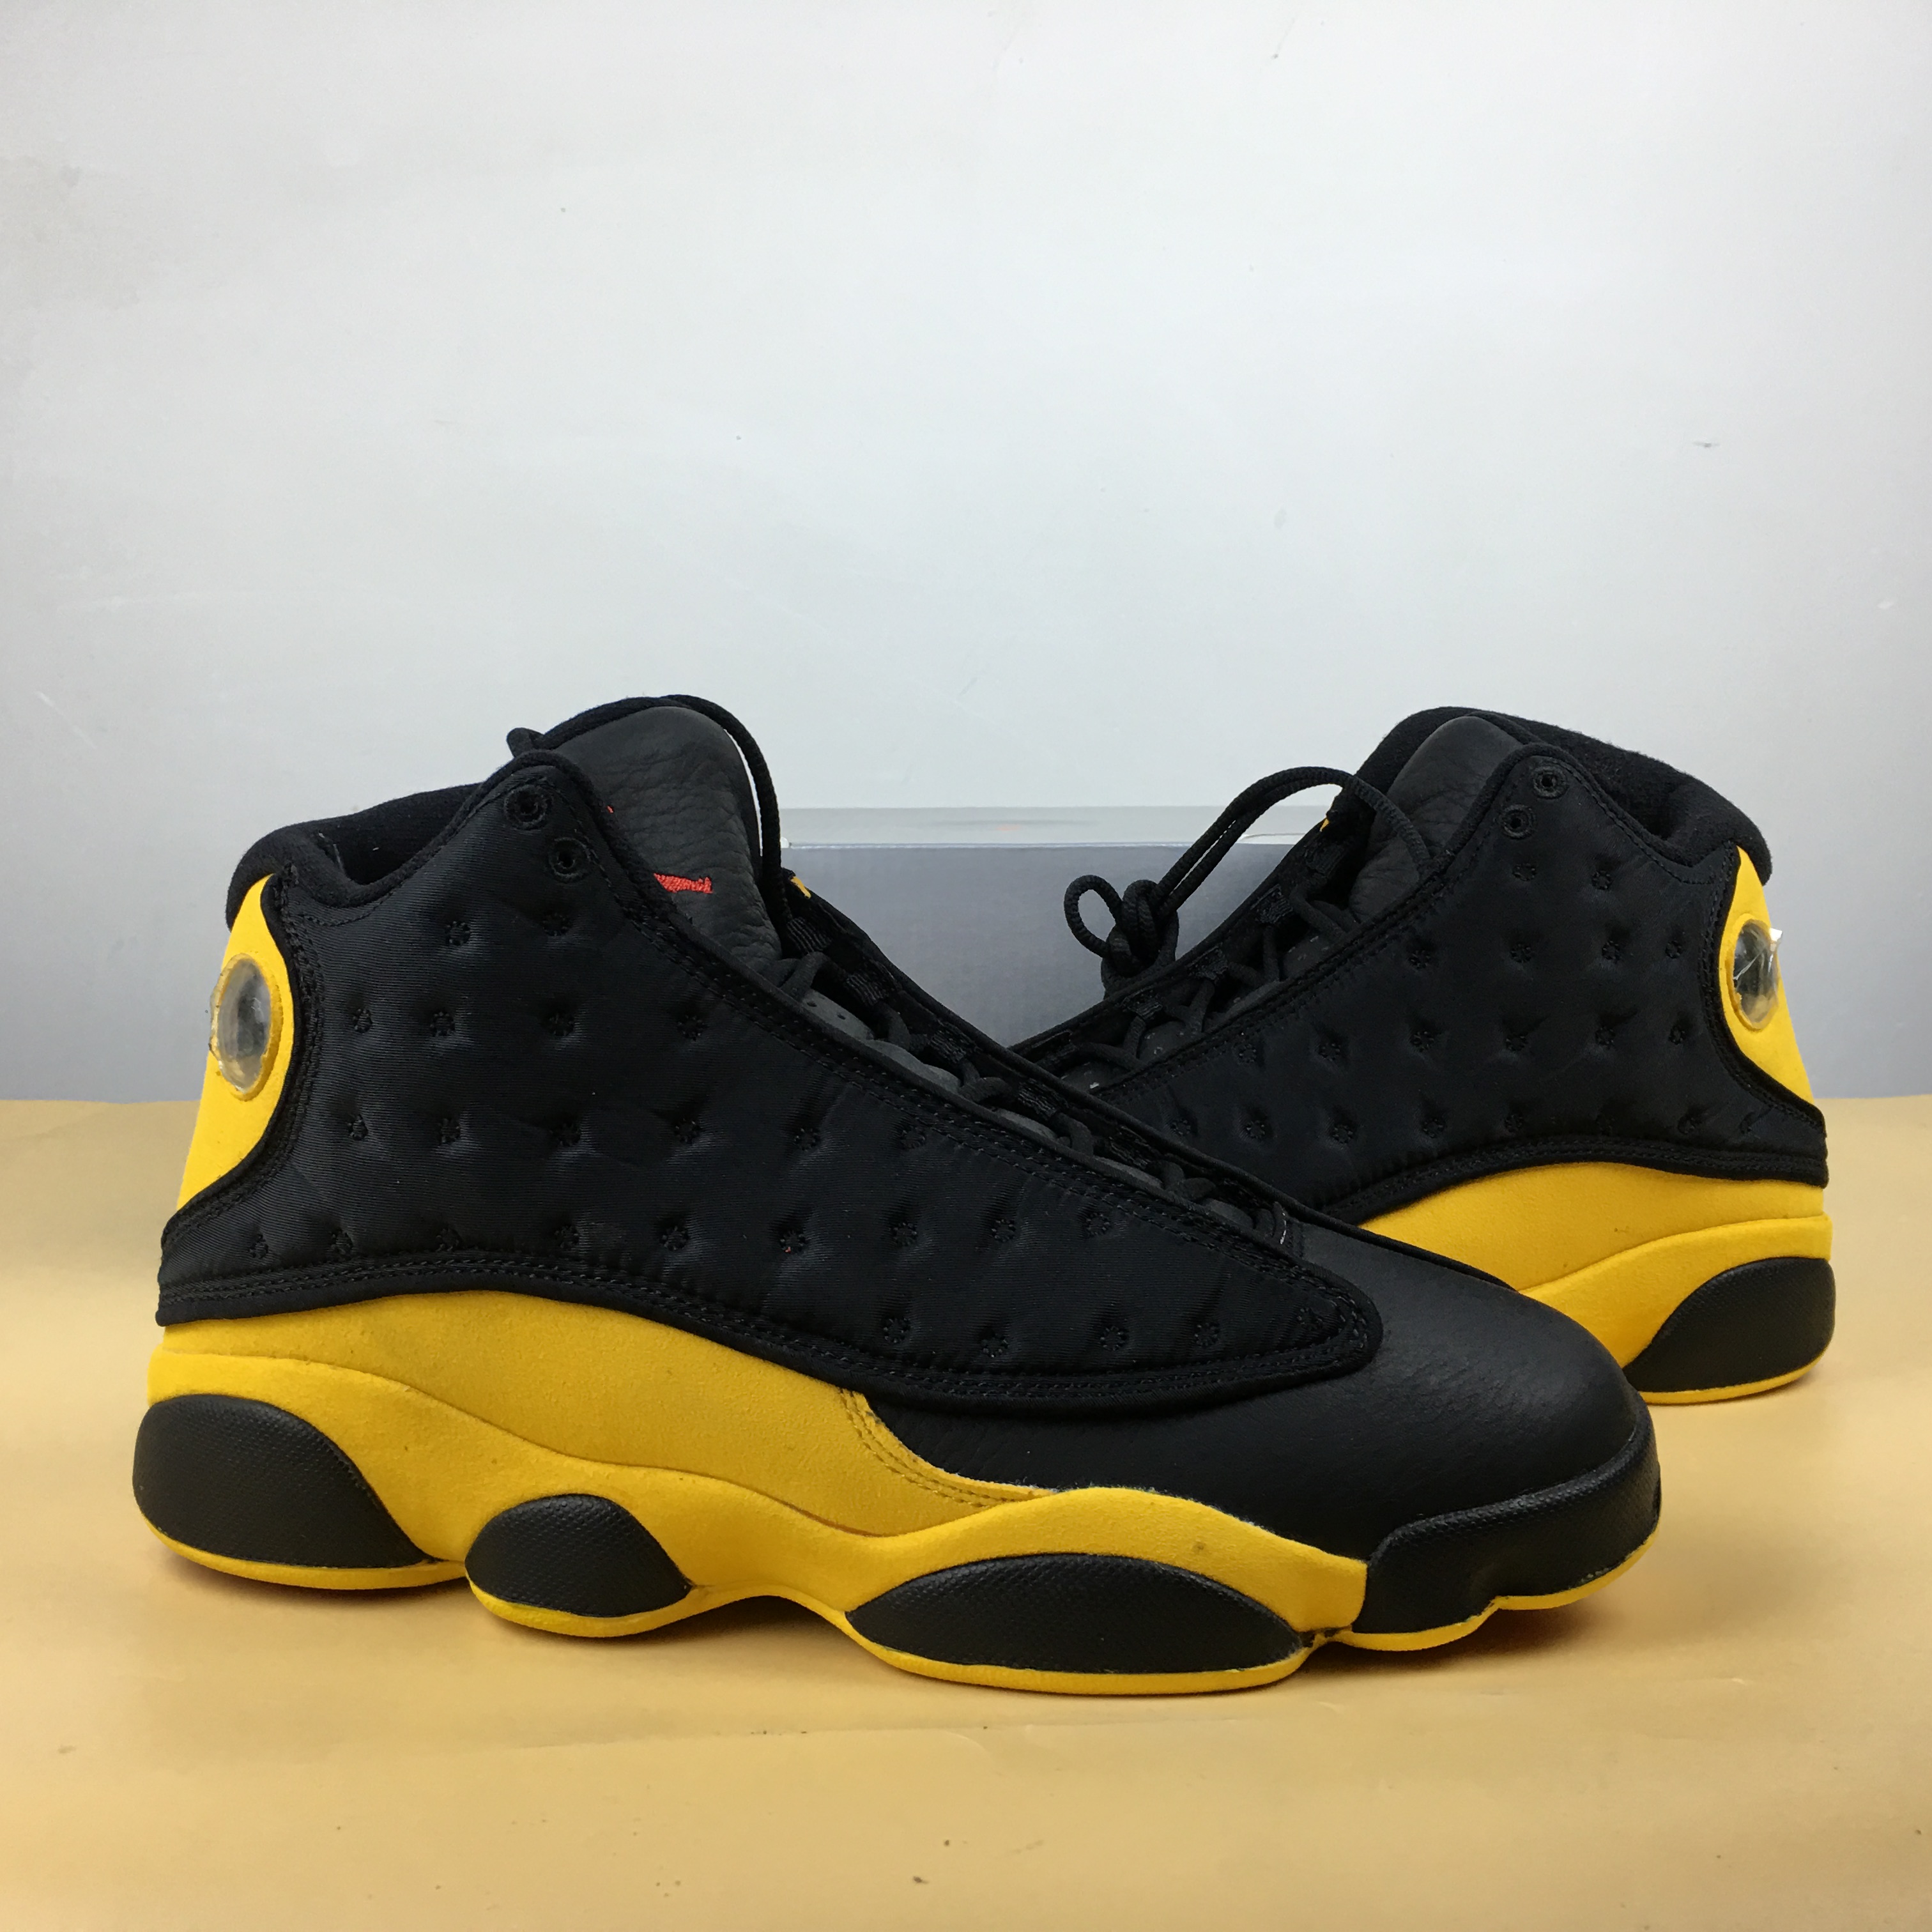 New Air Jordan 13 Melo Class of 2003 Shoes - Click Image to Close